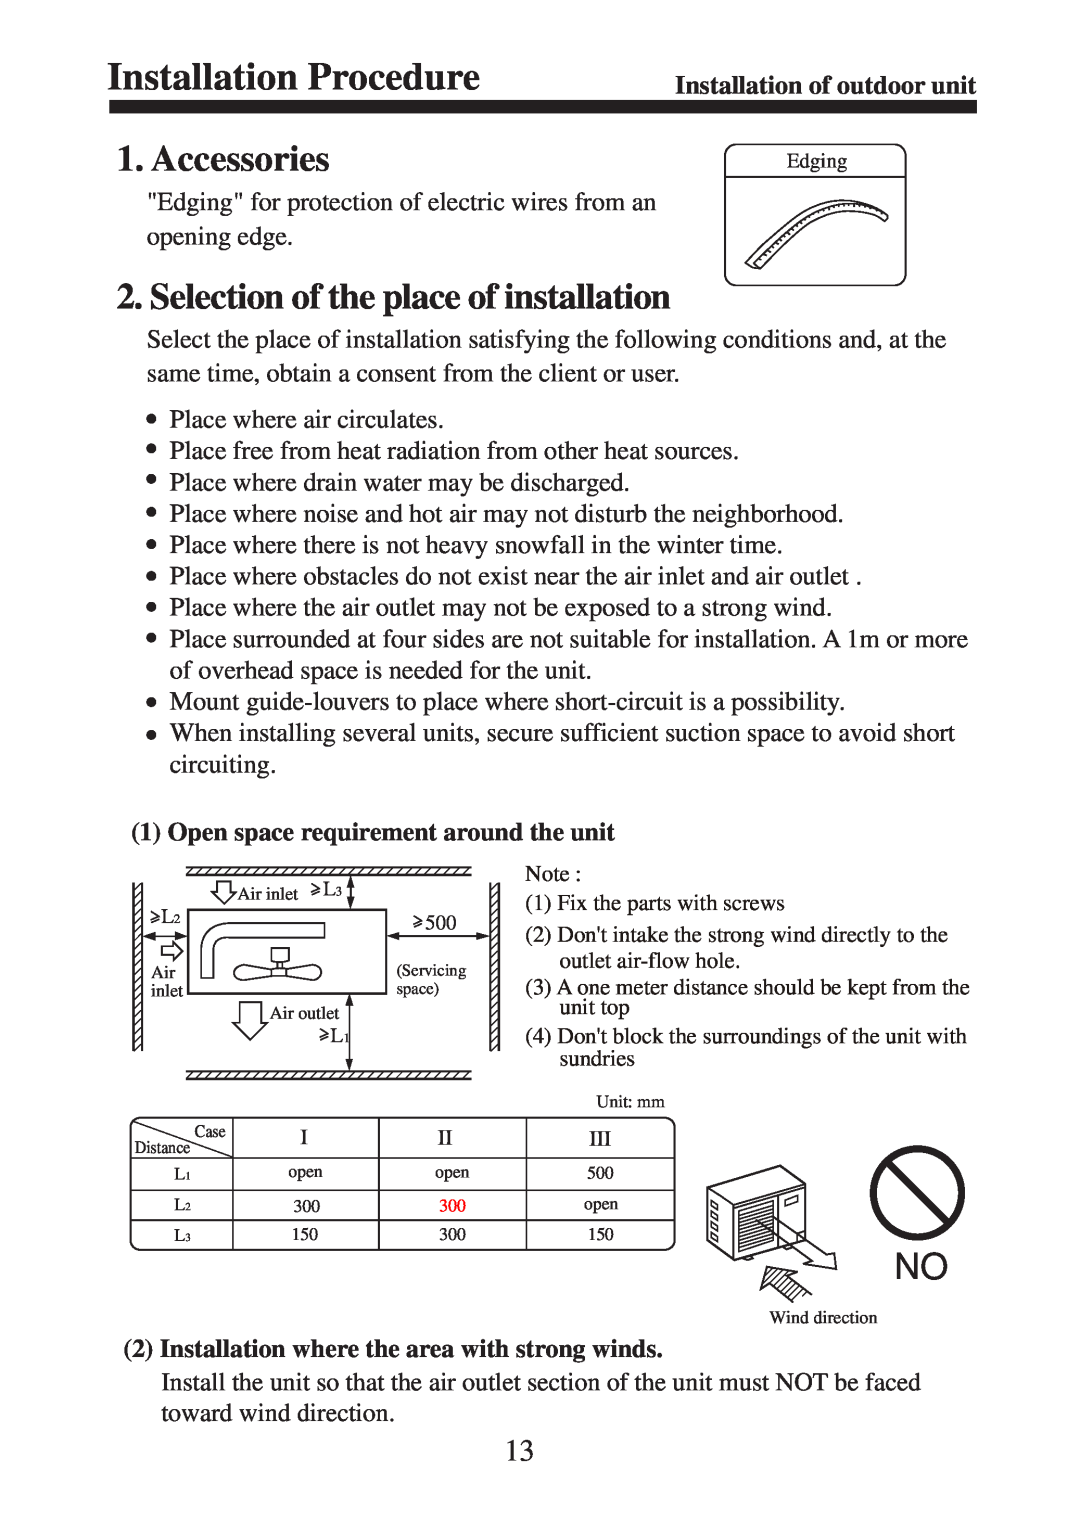 Haier AU182AFERA Installation Procedure, Accessories, Selection of the place of installation, Installation of outdoor unit 